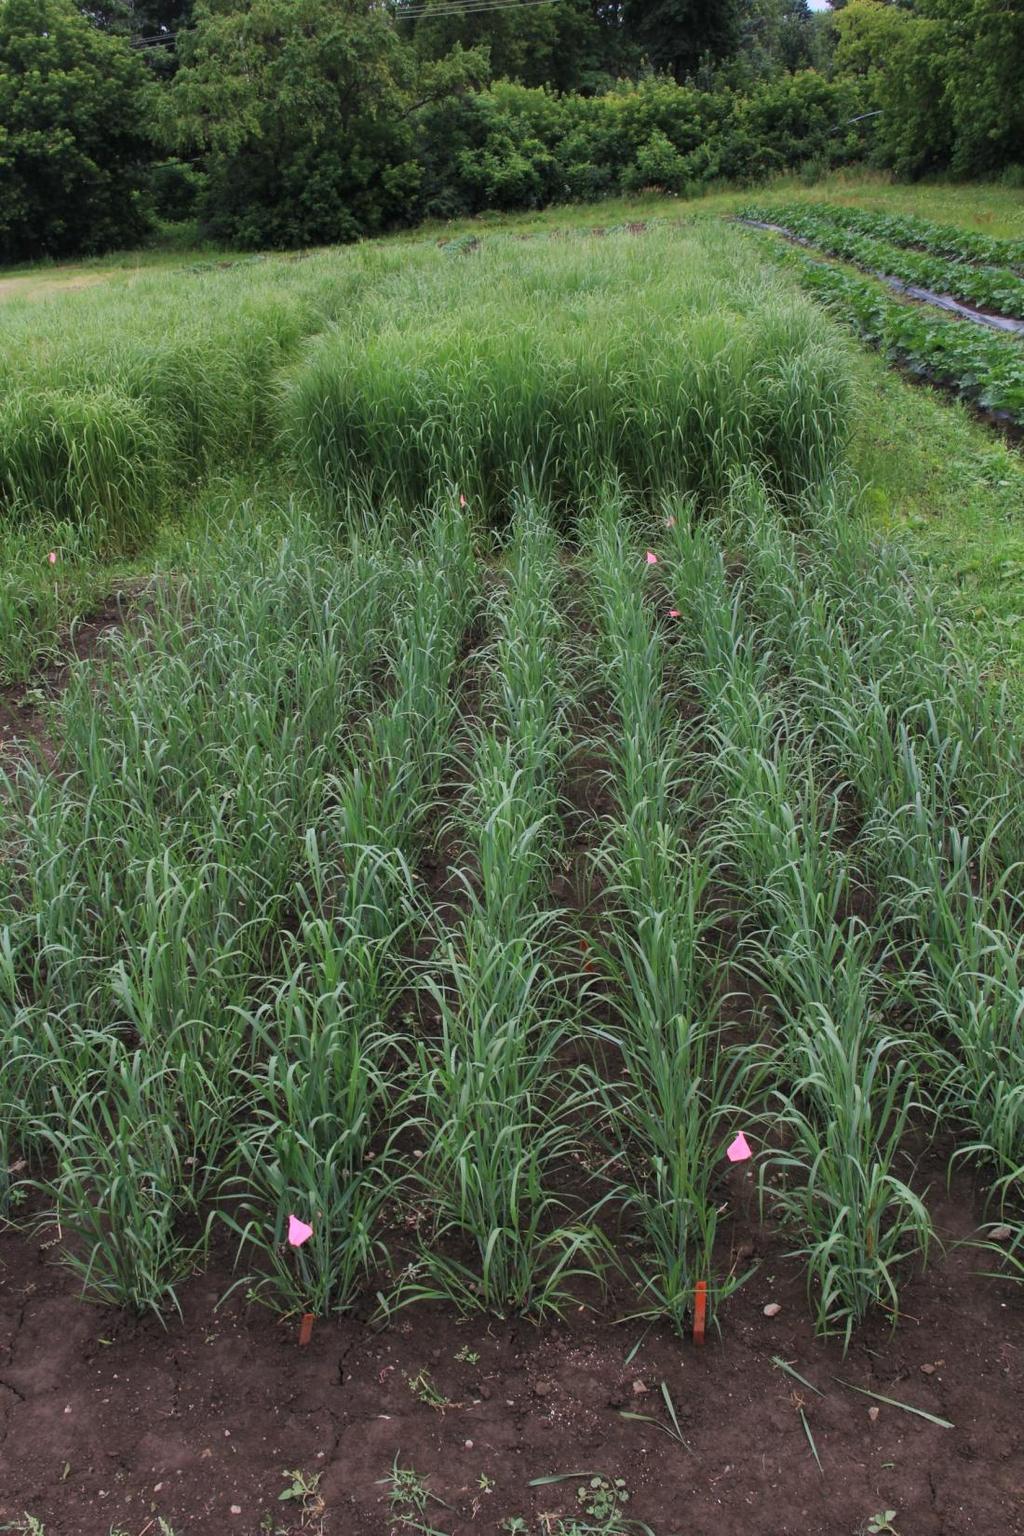 REAP-Canada has been conducting R&D on switchgrass in Eastern